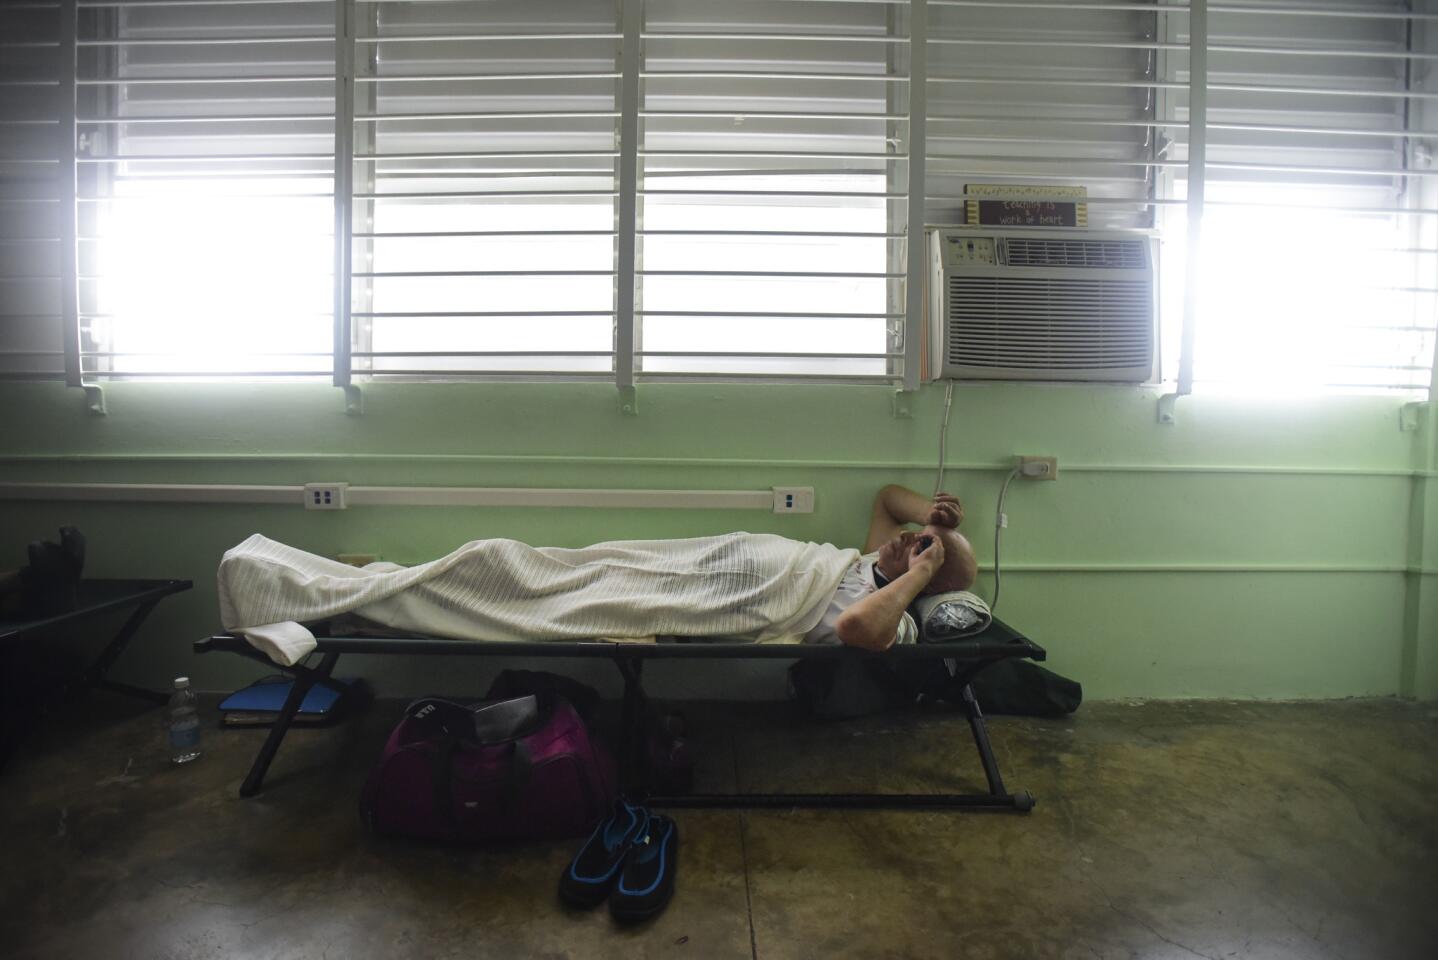 A man rests on a cot inside a shelter set up at the Berta Zalduondo elementary school during the passage of Hurricane Irma in Fajardo, northeast Puerto Rico, Sept. 6, 2017. Heavy rain and high winds lashed Puerto Rico's northeast coast Wednesday as Hurricane Irma roared through Caribbean islands.